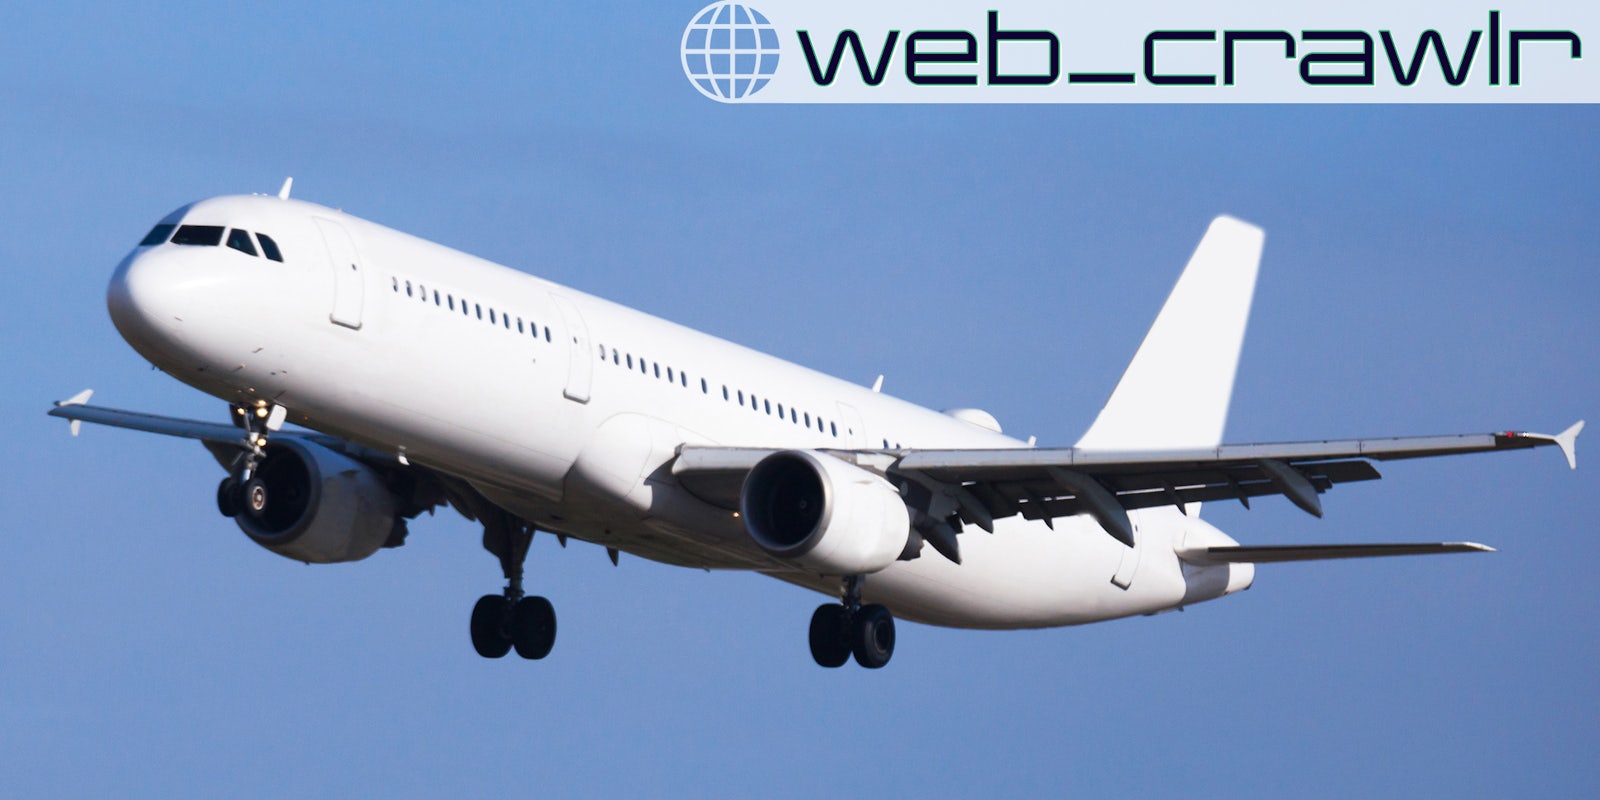 An airplane taking off. The Daily Dot newsletter web_crawlr logo is in the top right corner.